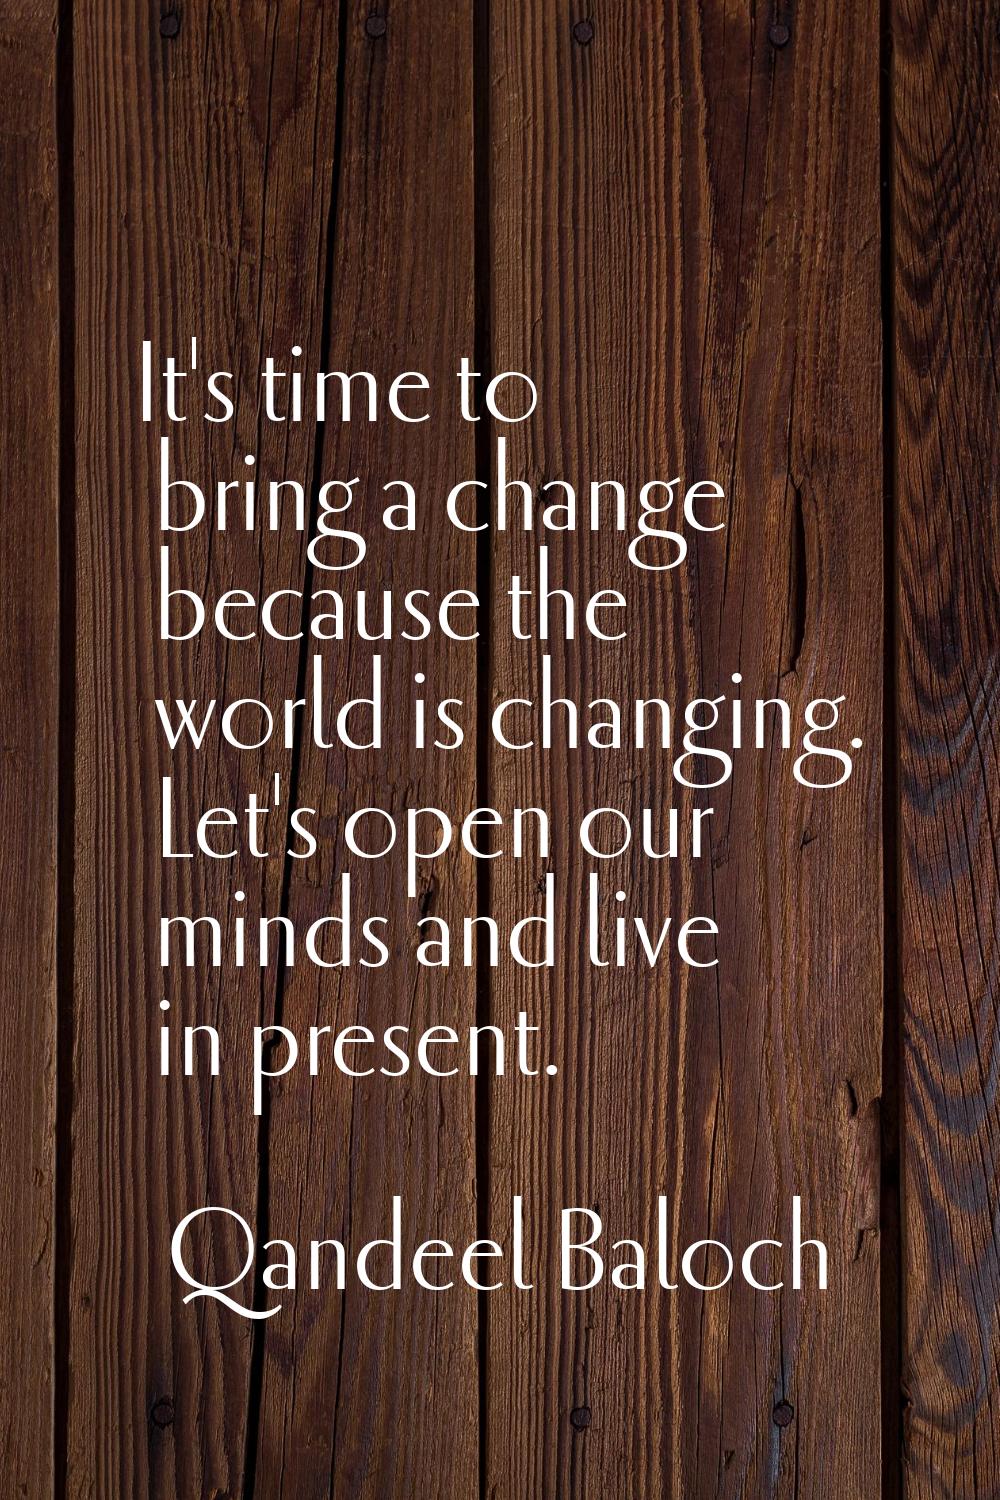 It's time to bring a change because the world is changing. Let's open our minds and live in present